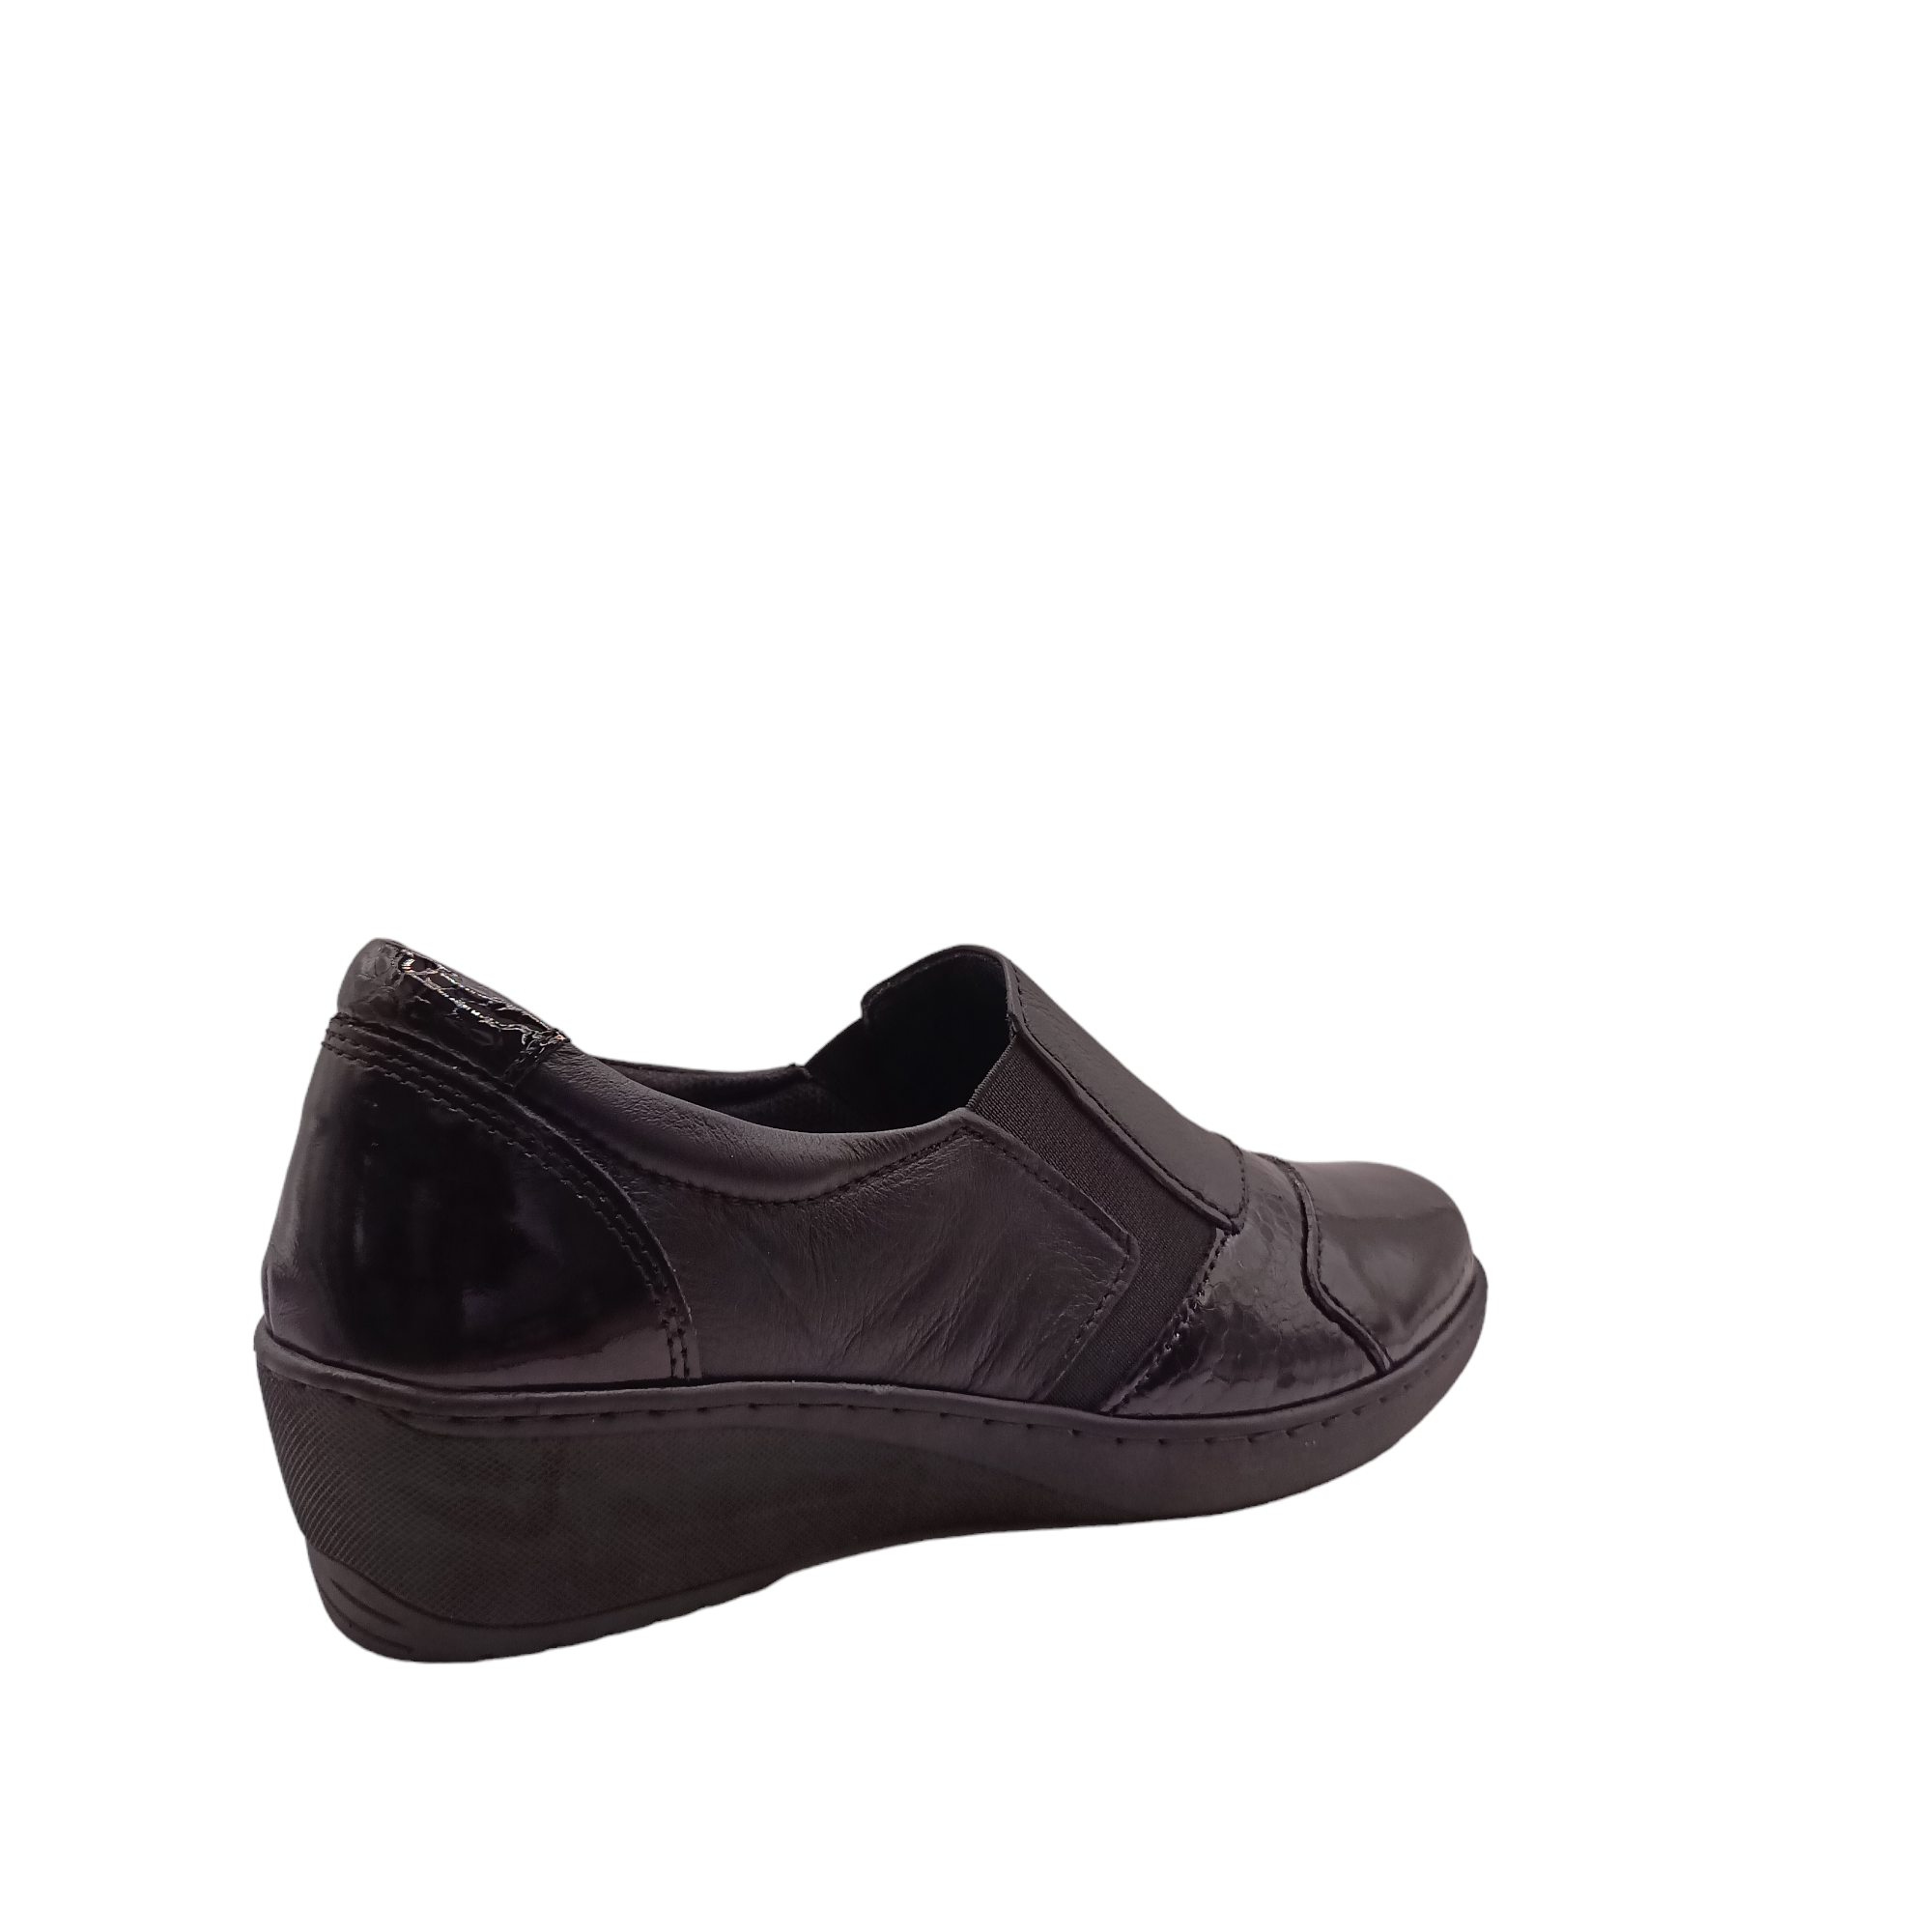 Shop CP461-18 Cabello - with shoe&me - from Cabello - Shoes - Shoe, Winter, Womens - [collection]